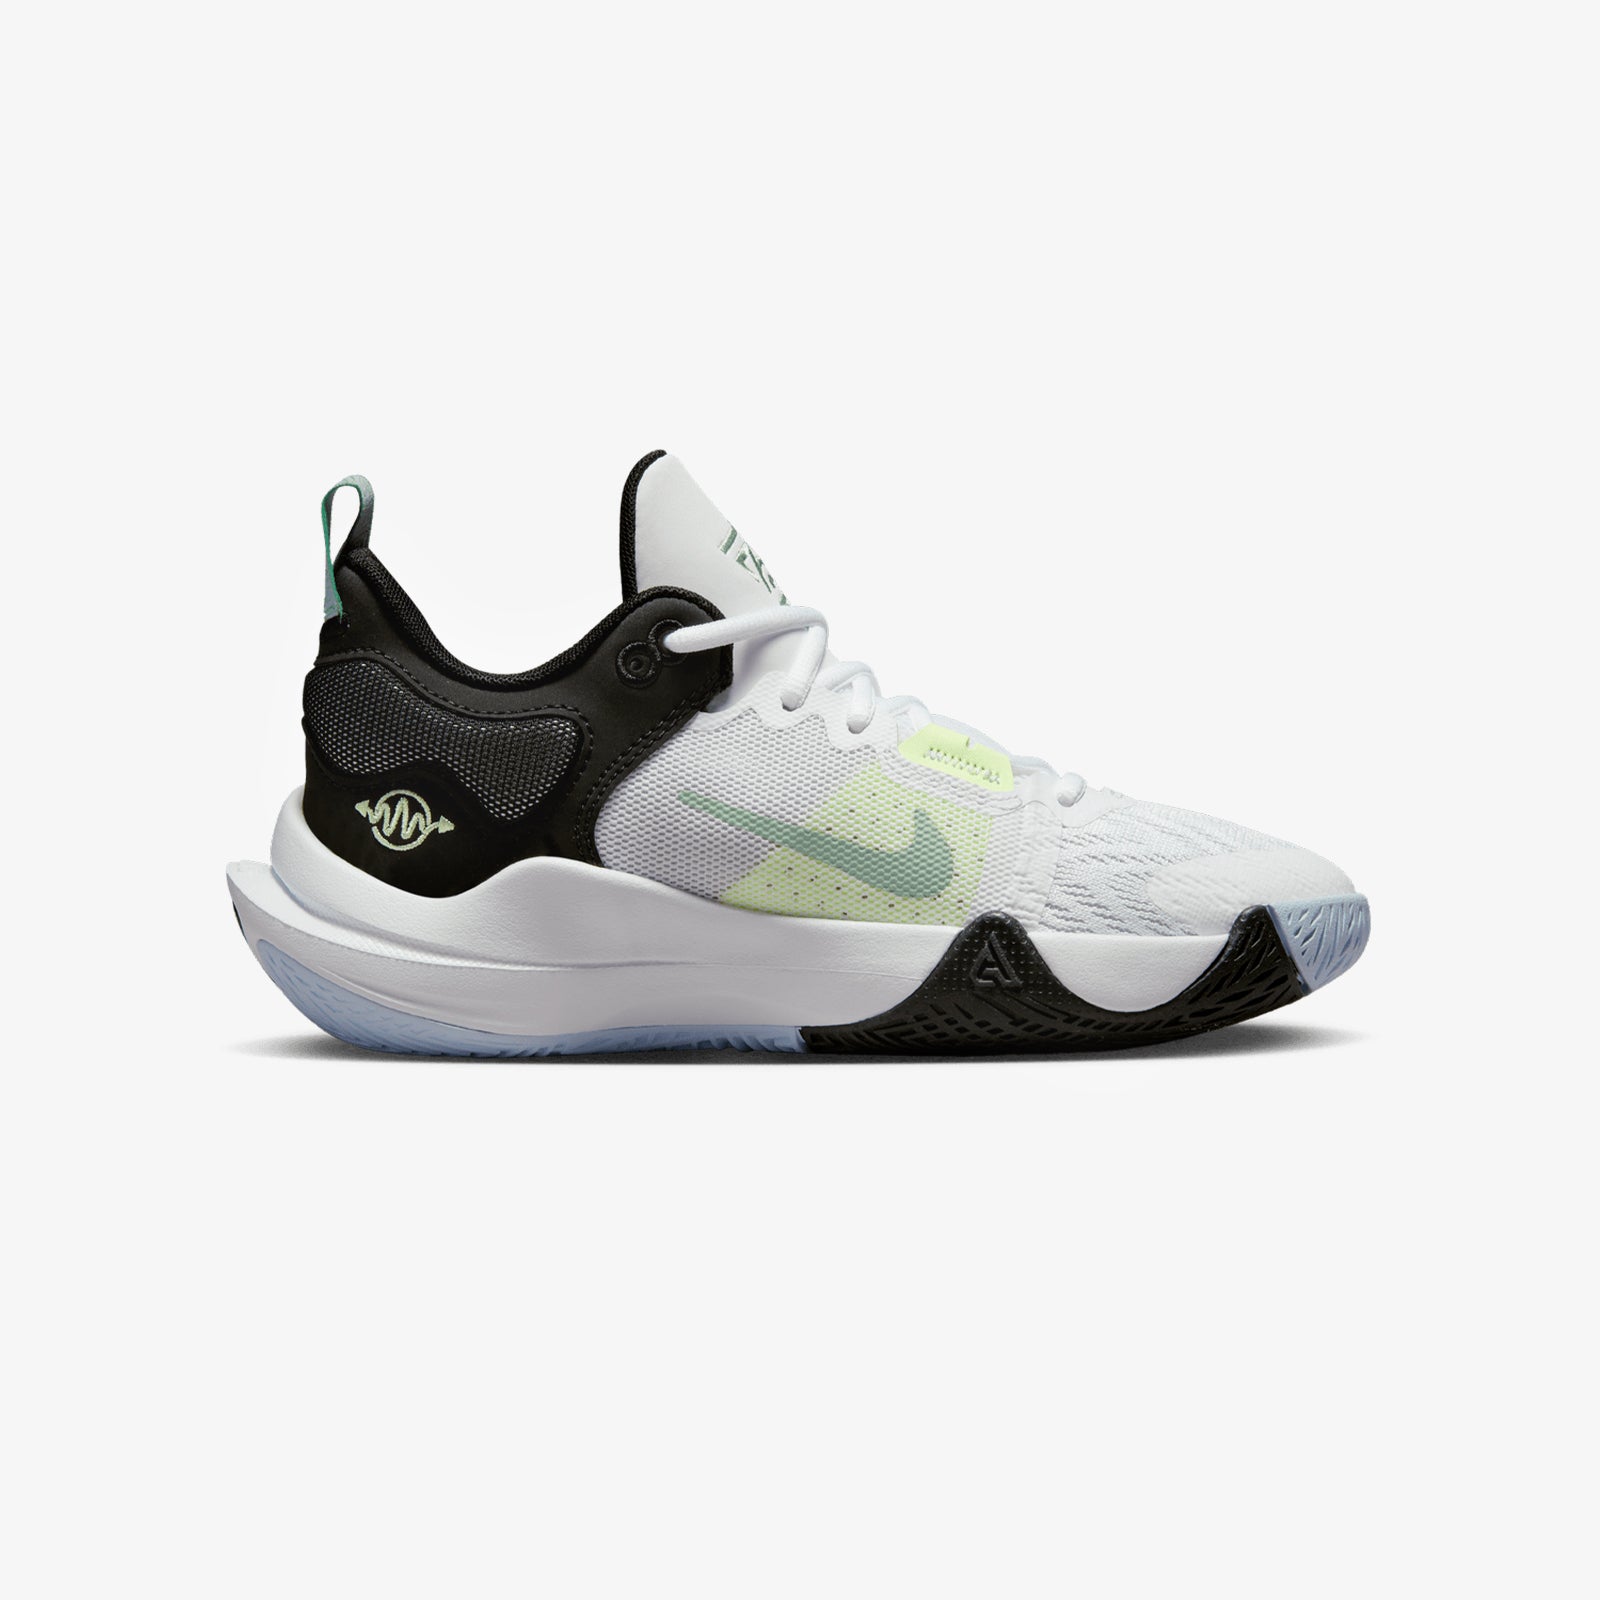 Giannis Immortality 2 (GS) - White/Barely Volt - Throwback